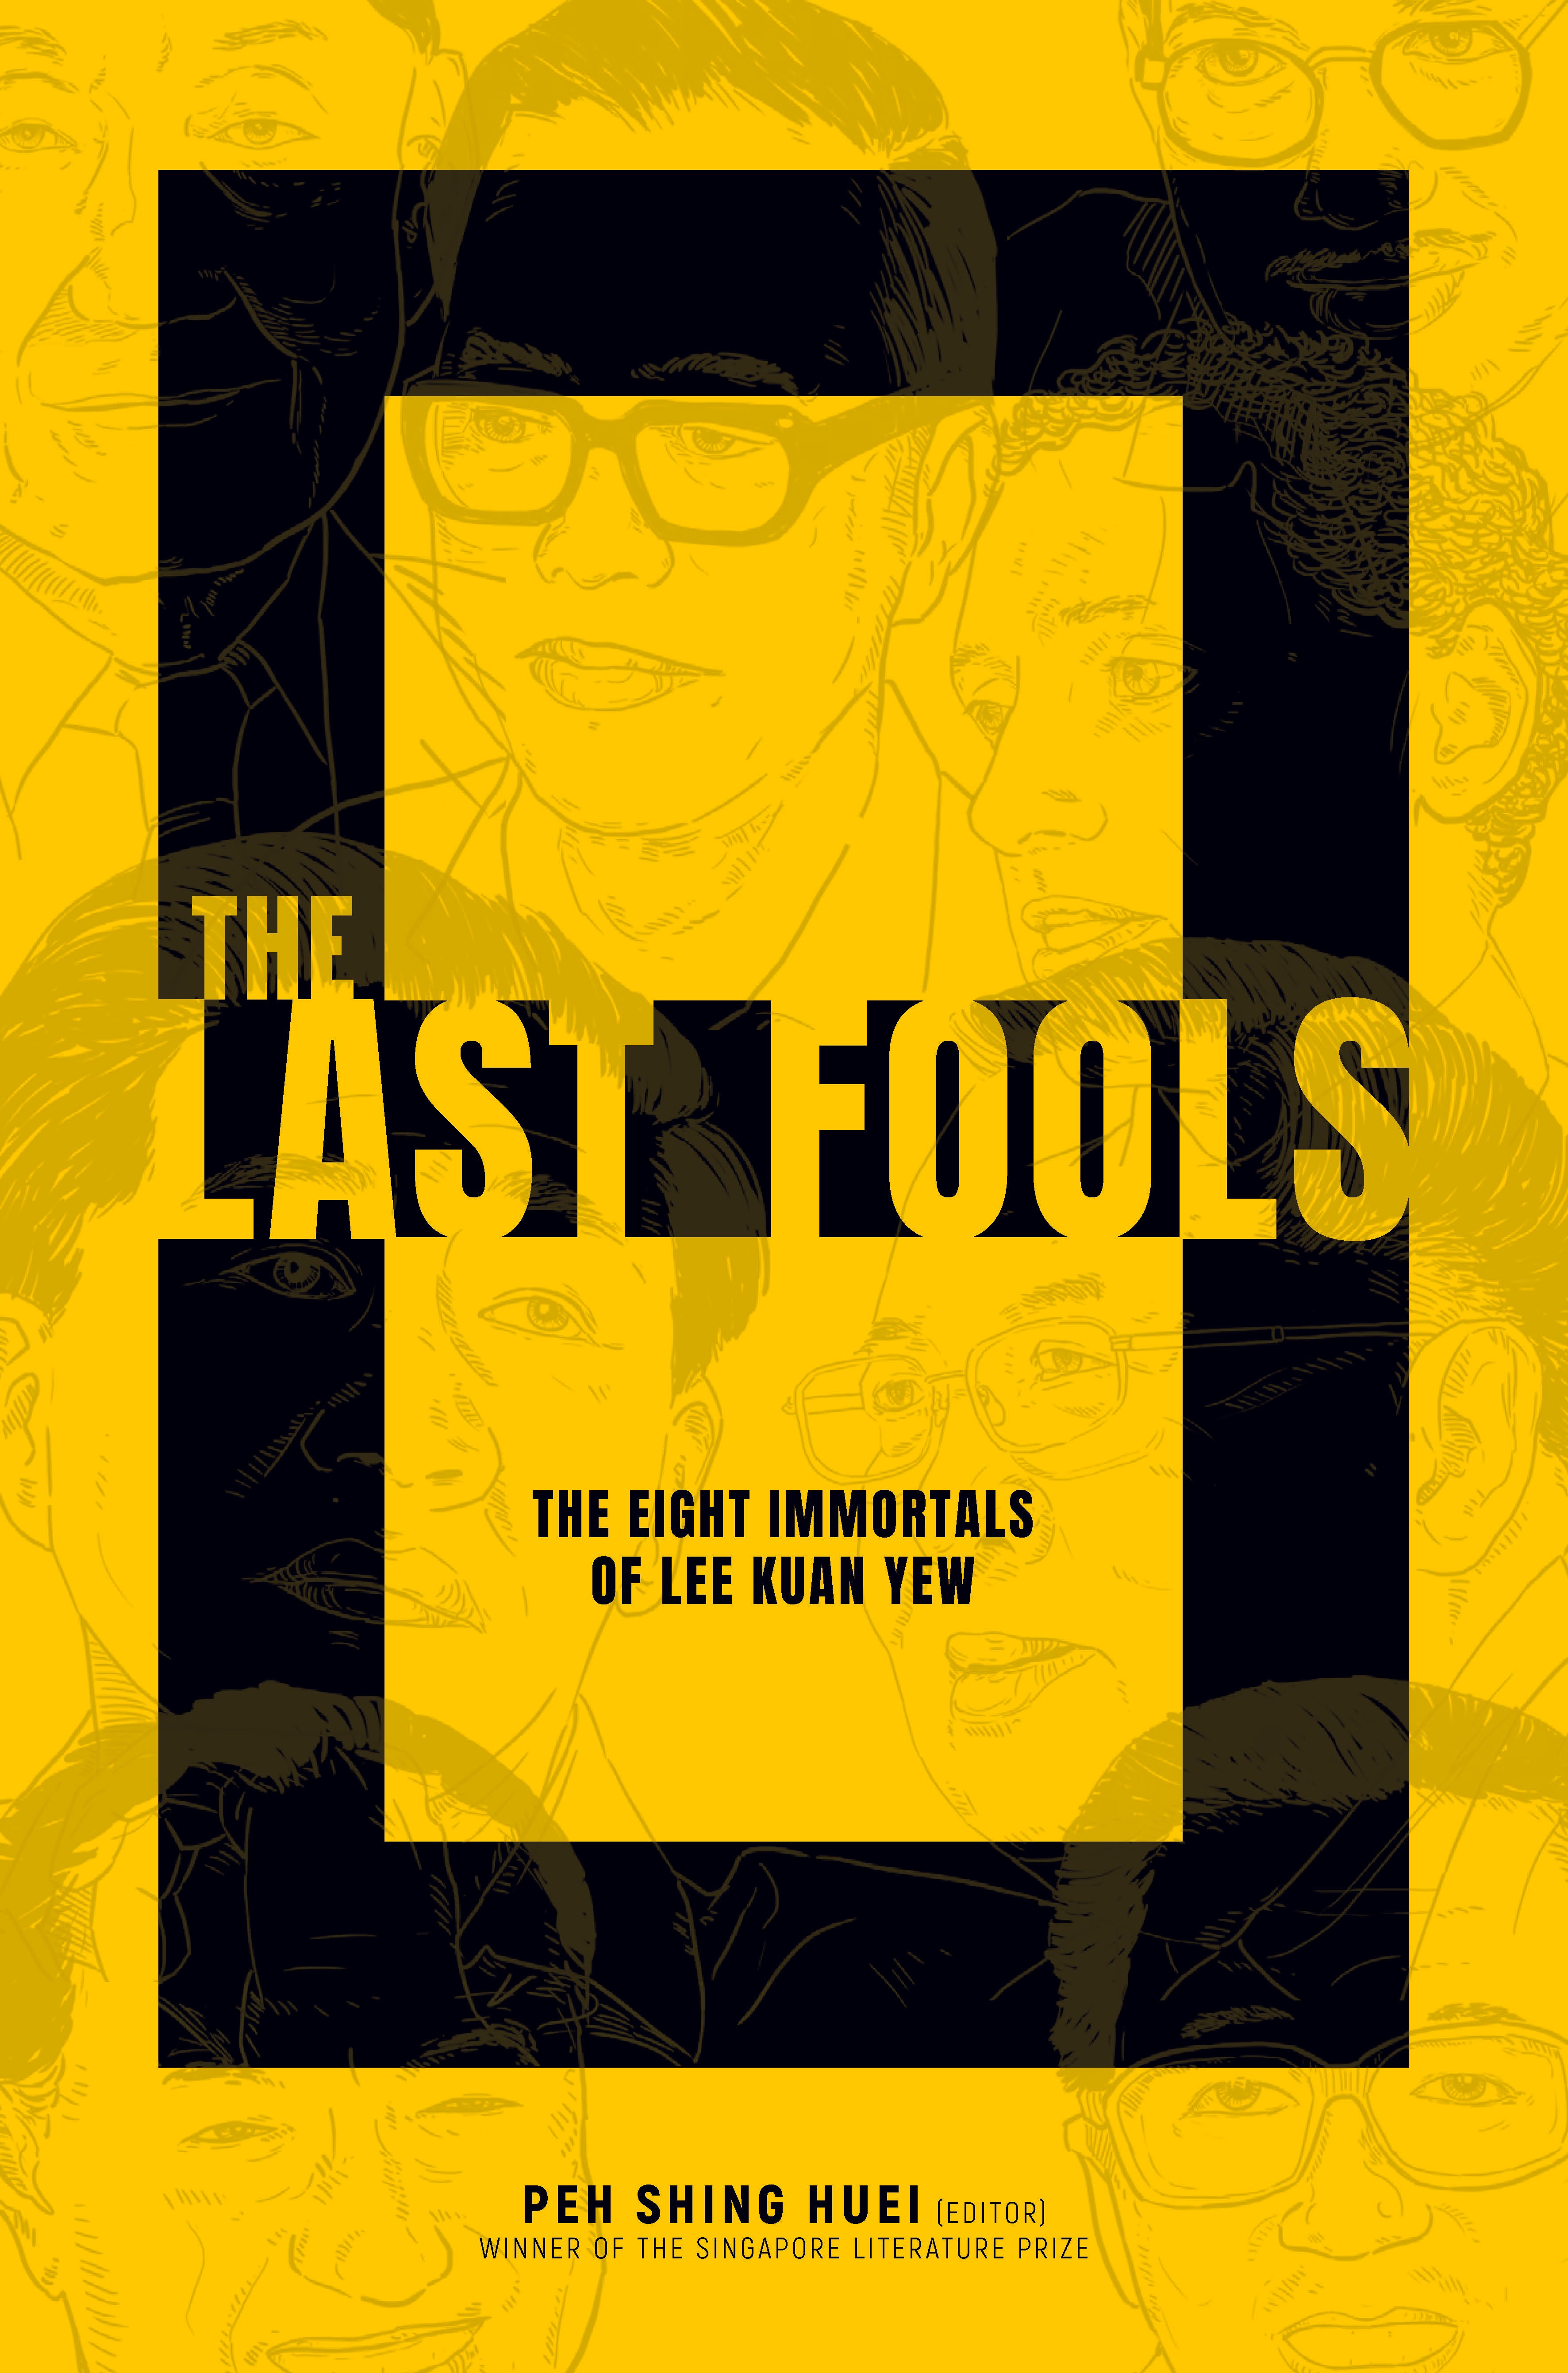 The Last Fools: The Eight Immortals of Lee Kuan Yew